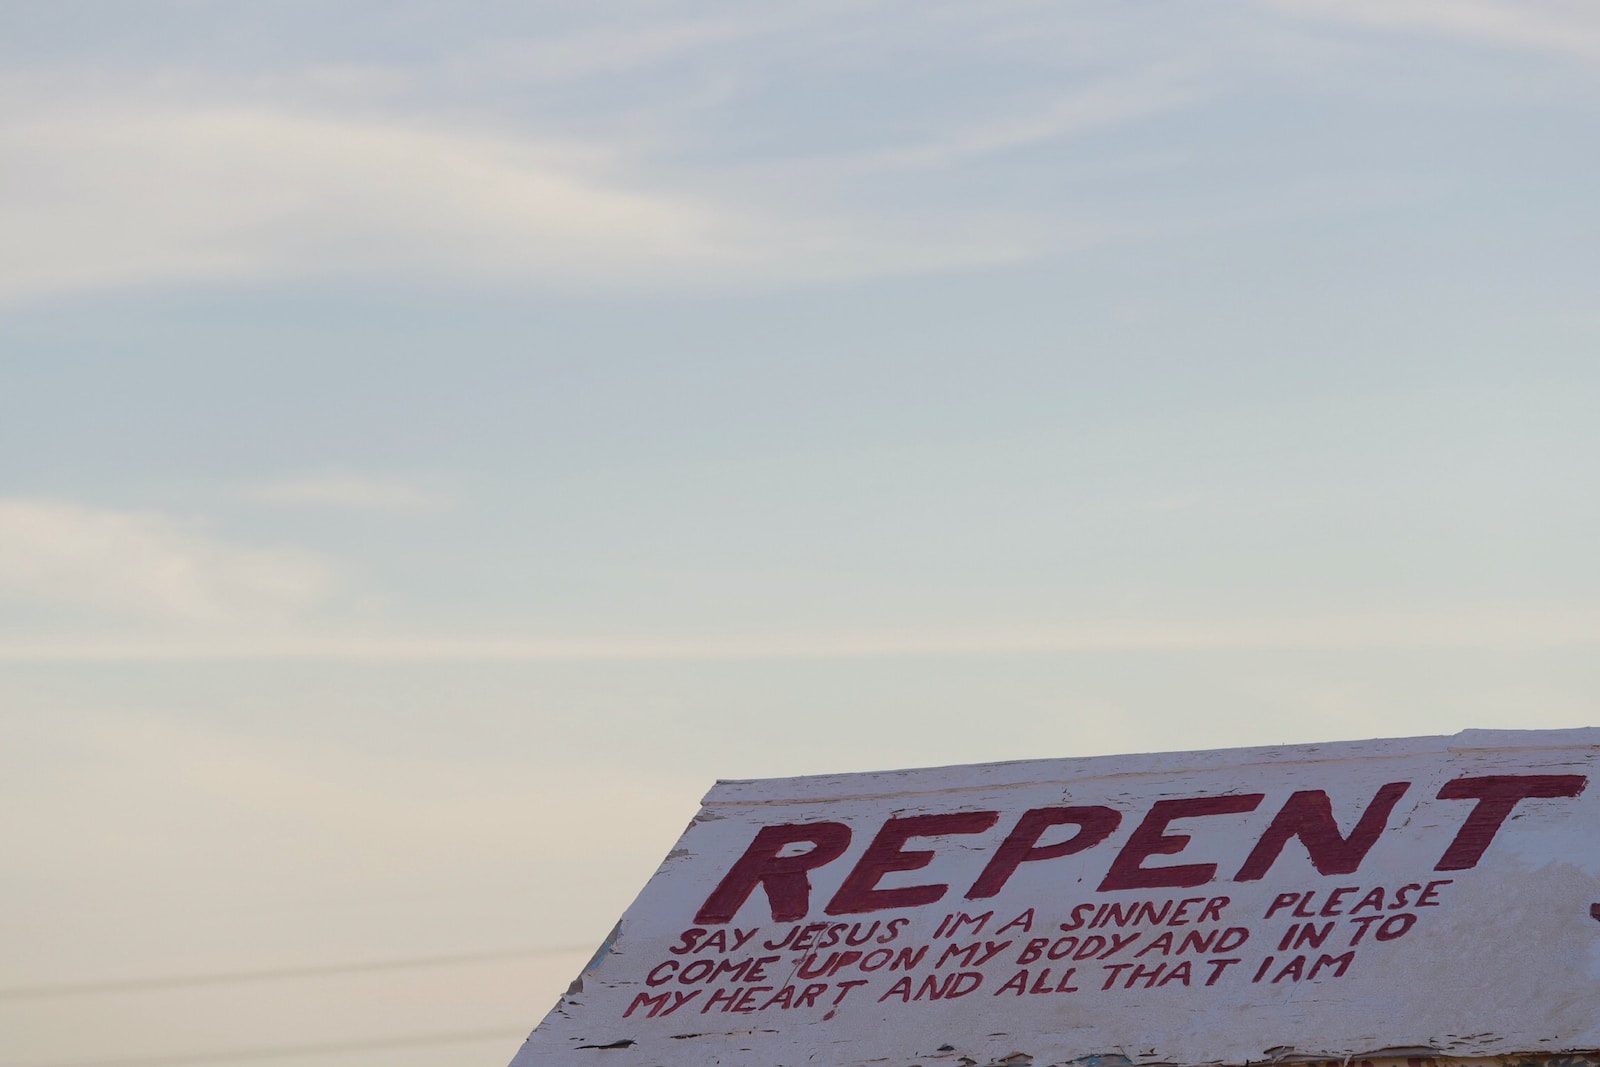 Repent signage during daytime